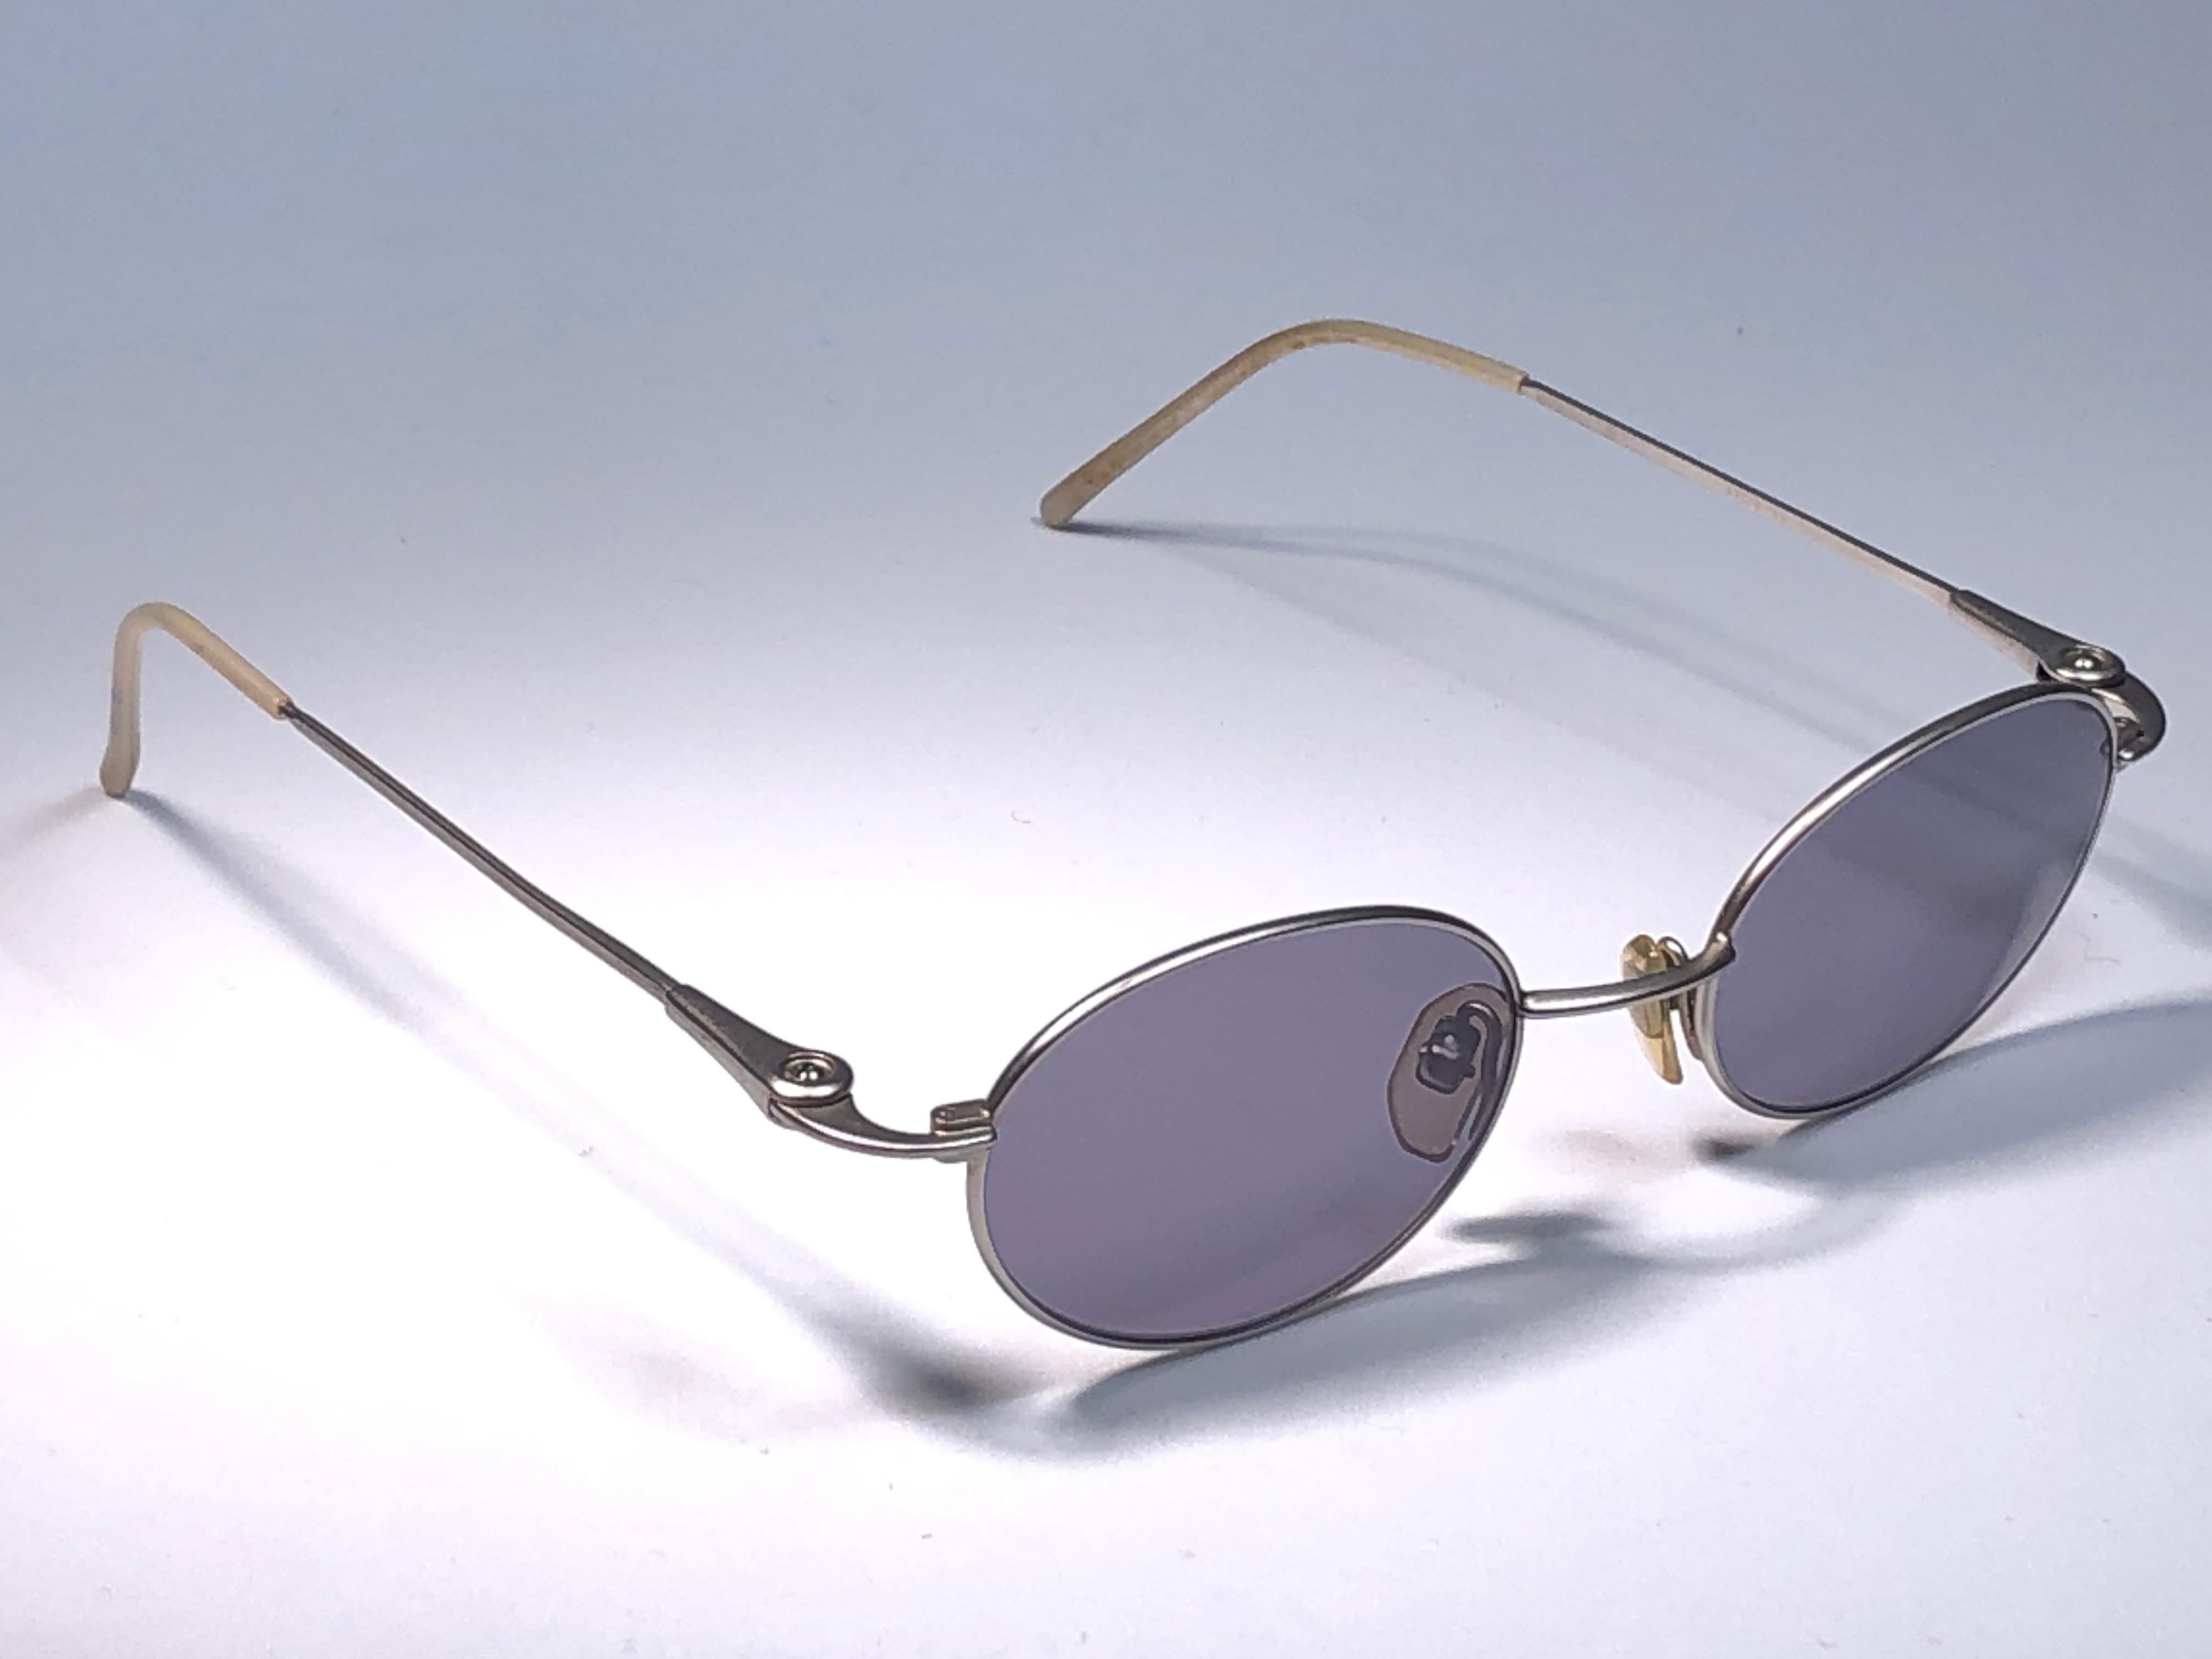 New Vintage Yohji Yamamoto 51 6101 Matte Silver  1990's Made in Japan Sunglasses In New Condition For Sale In Baleares, Baleares